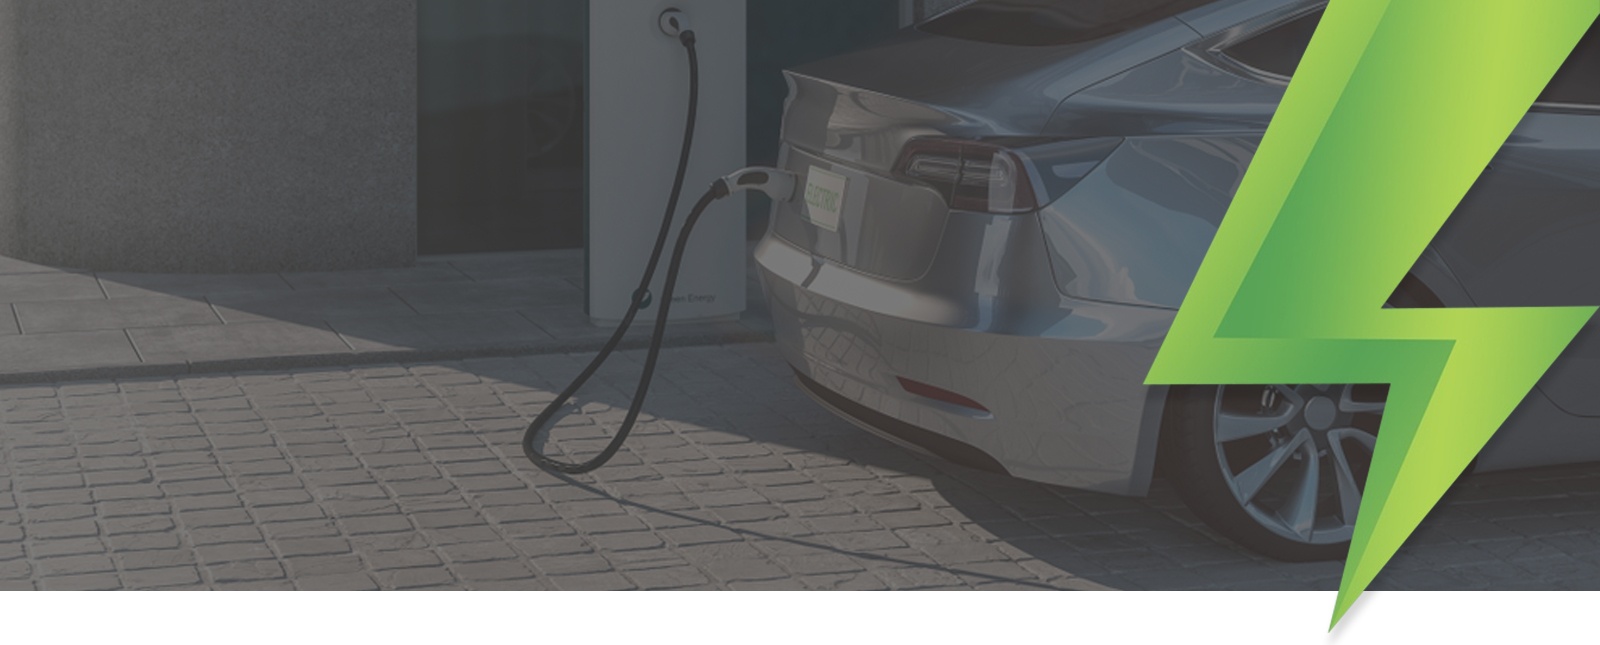 Electric Vehicle Charger Installation Services by Experienced Electrician from Delray Electric Ltd. in Morinville